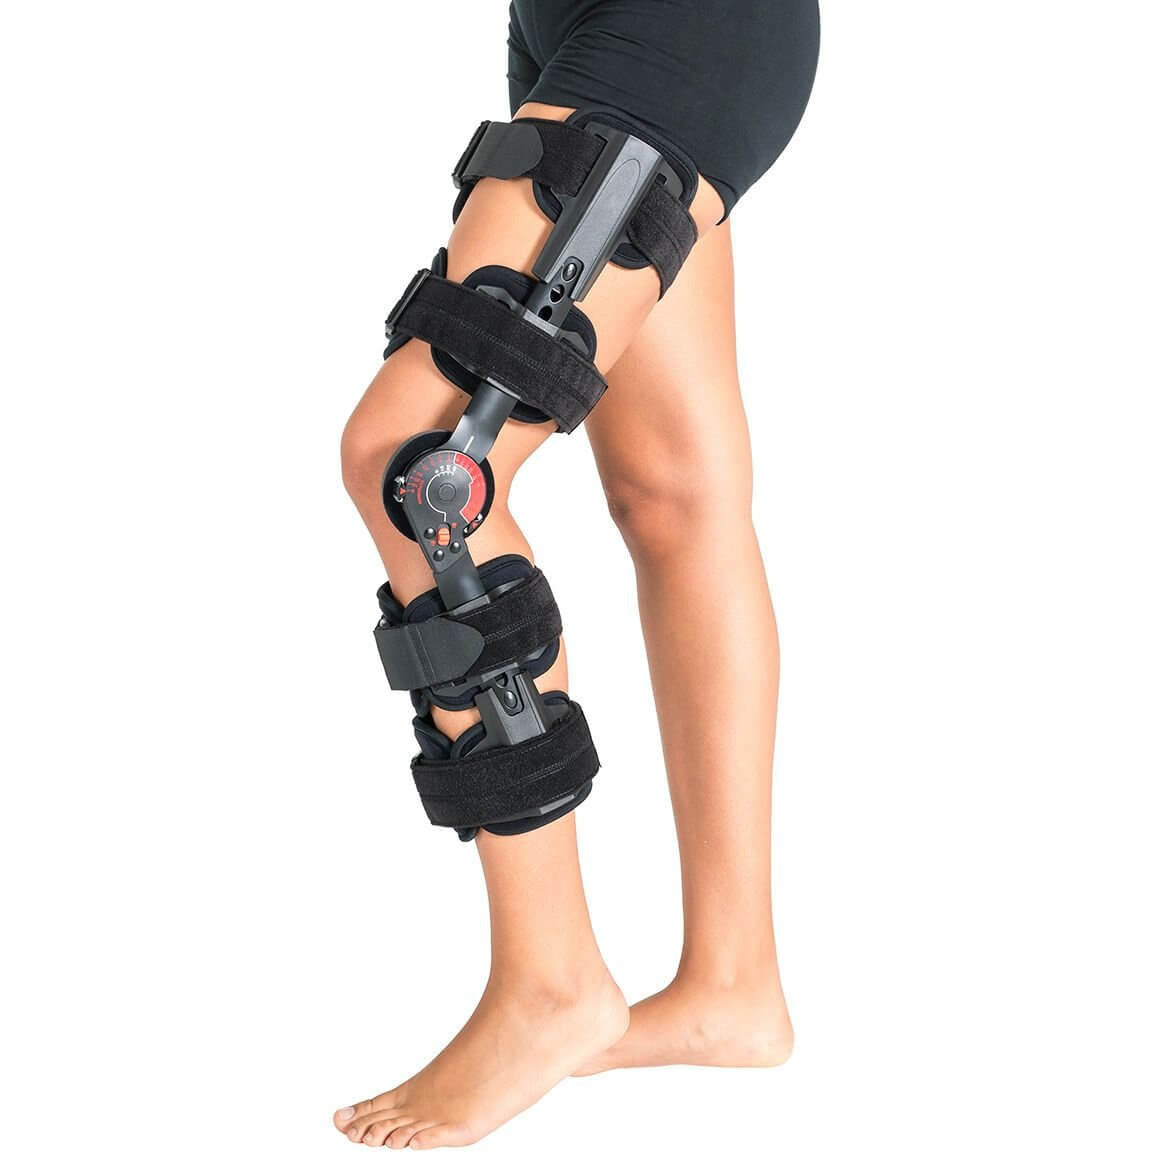 Post-Op Knee Brace for ACL Reconstruction Surgery